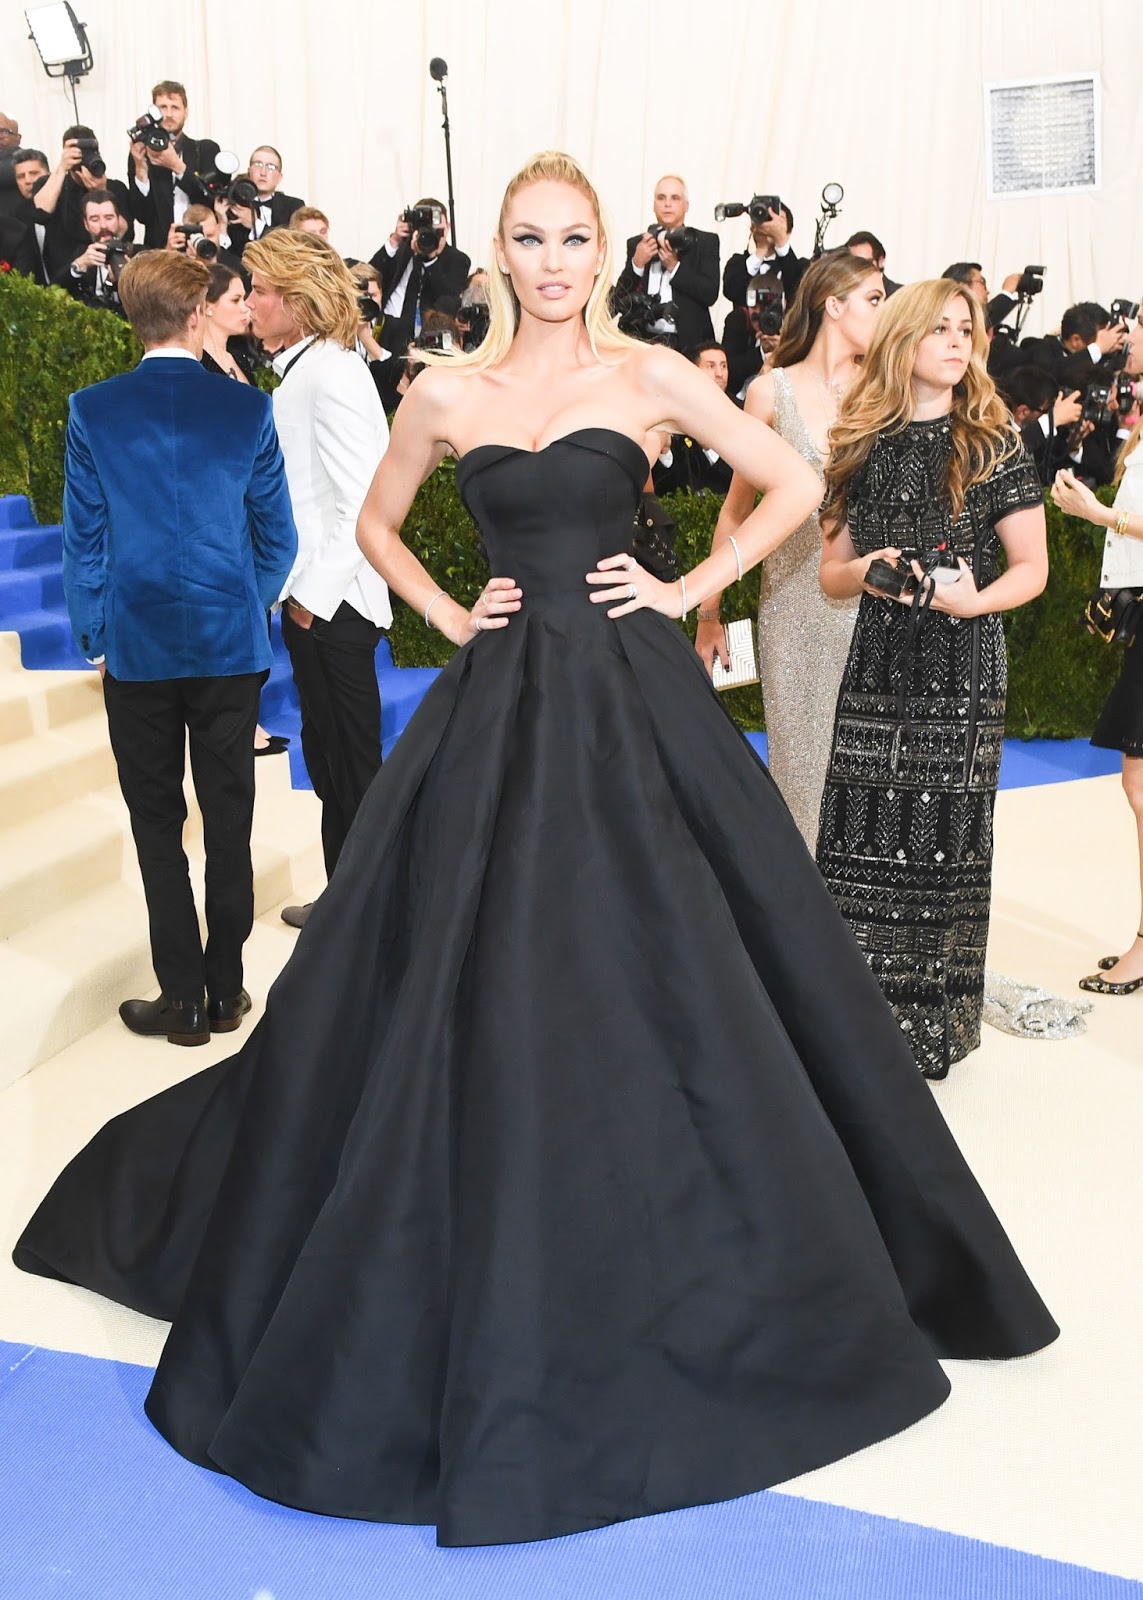 The GLAMOROUS: AT THE MET GALA Part II